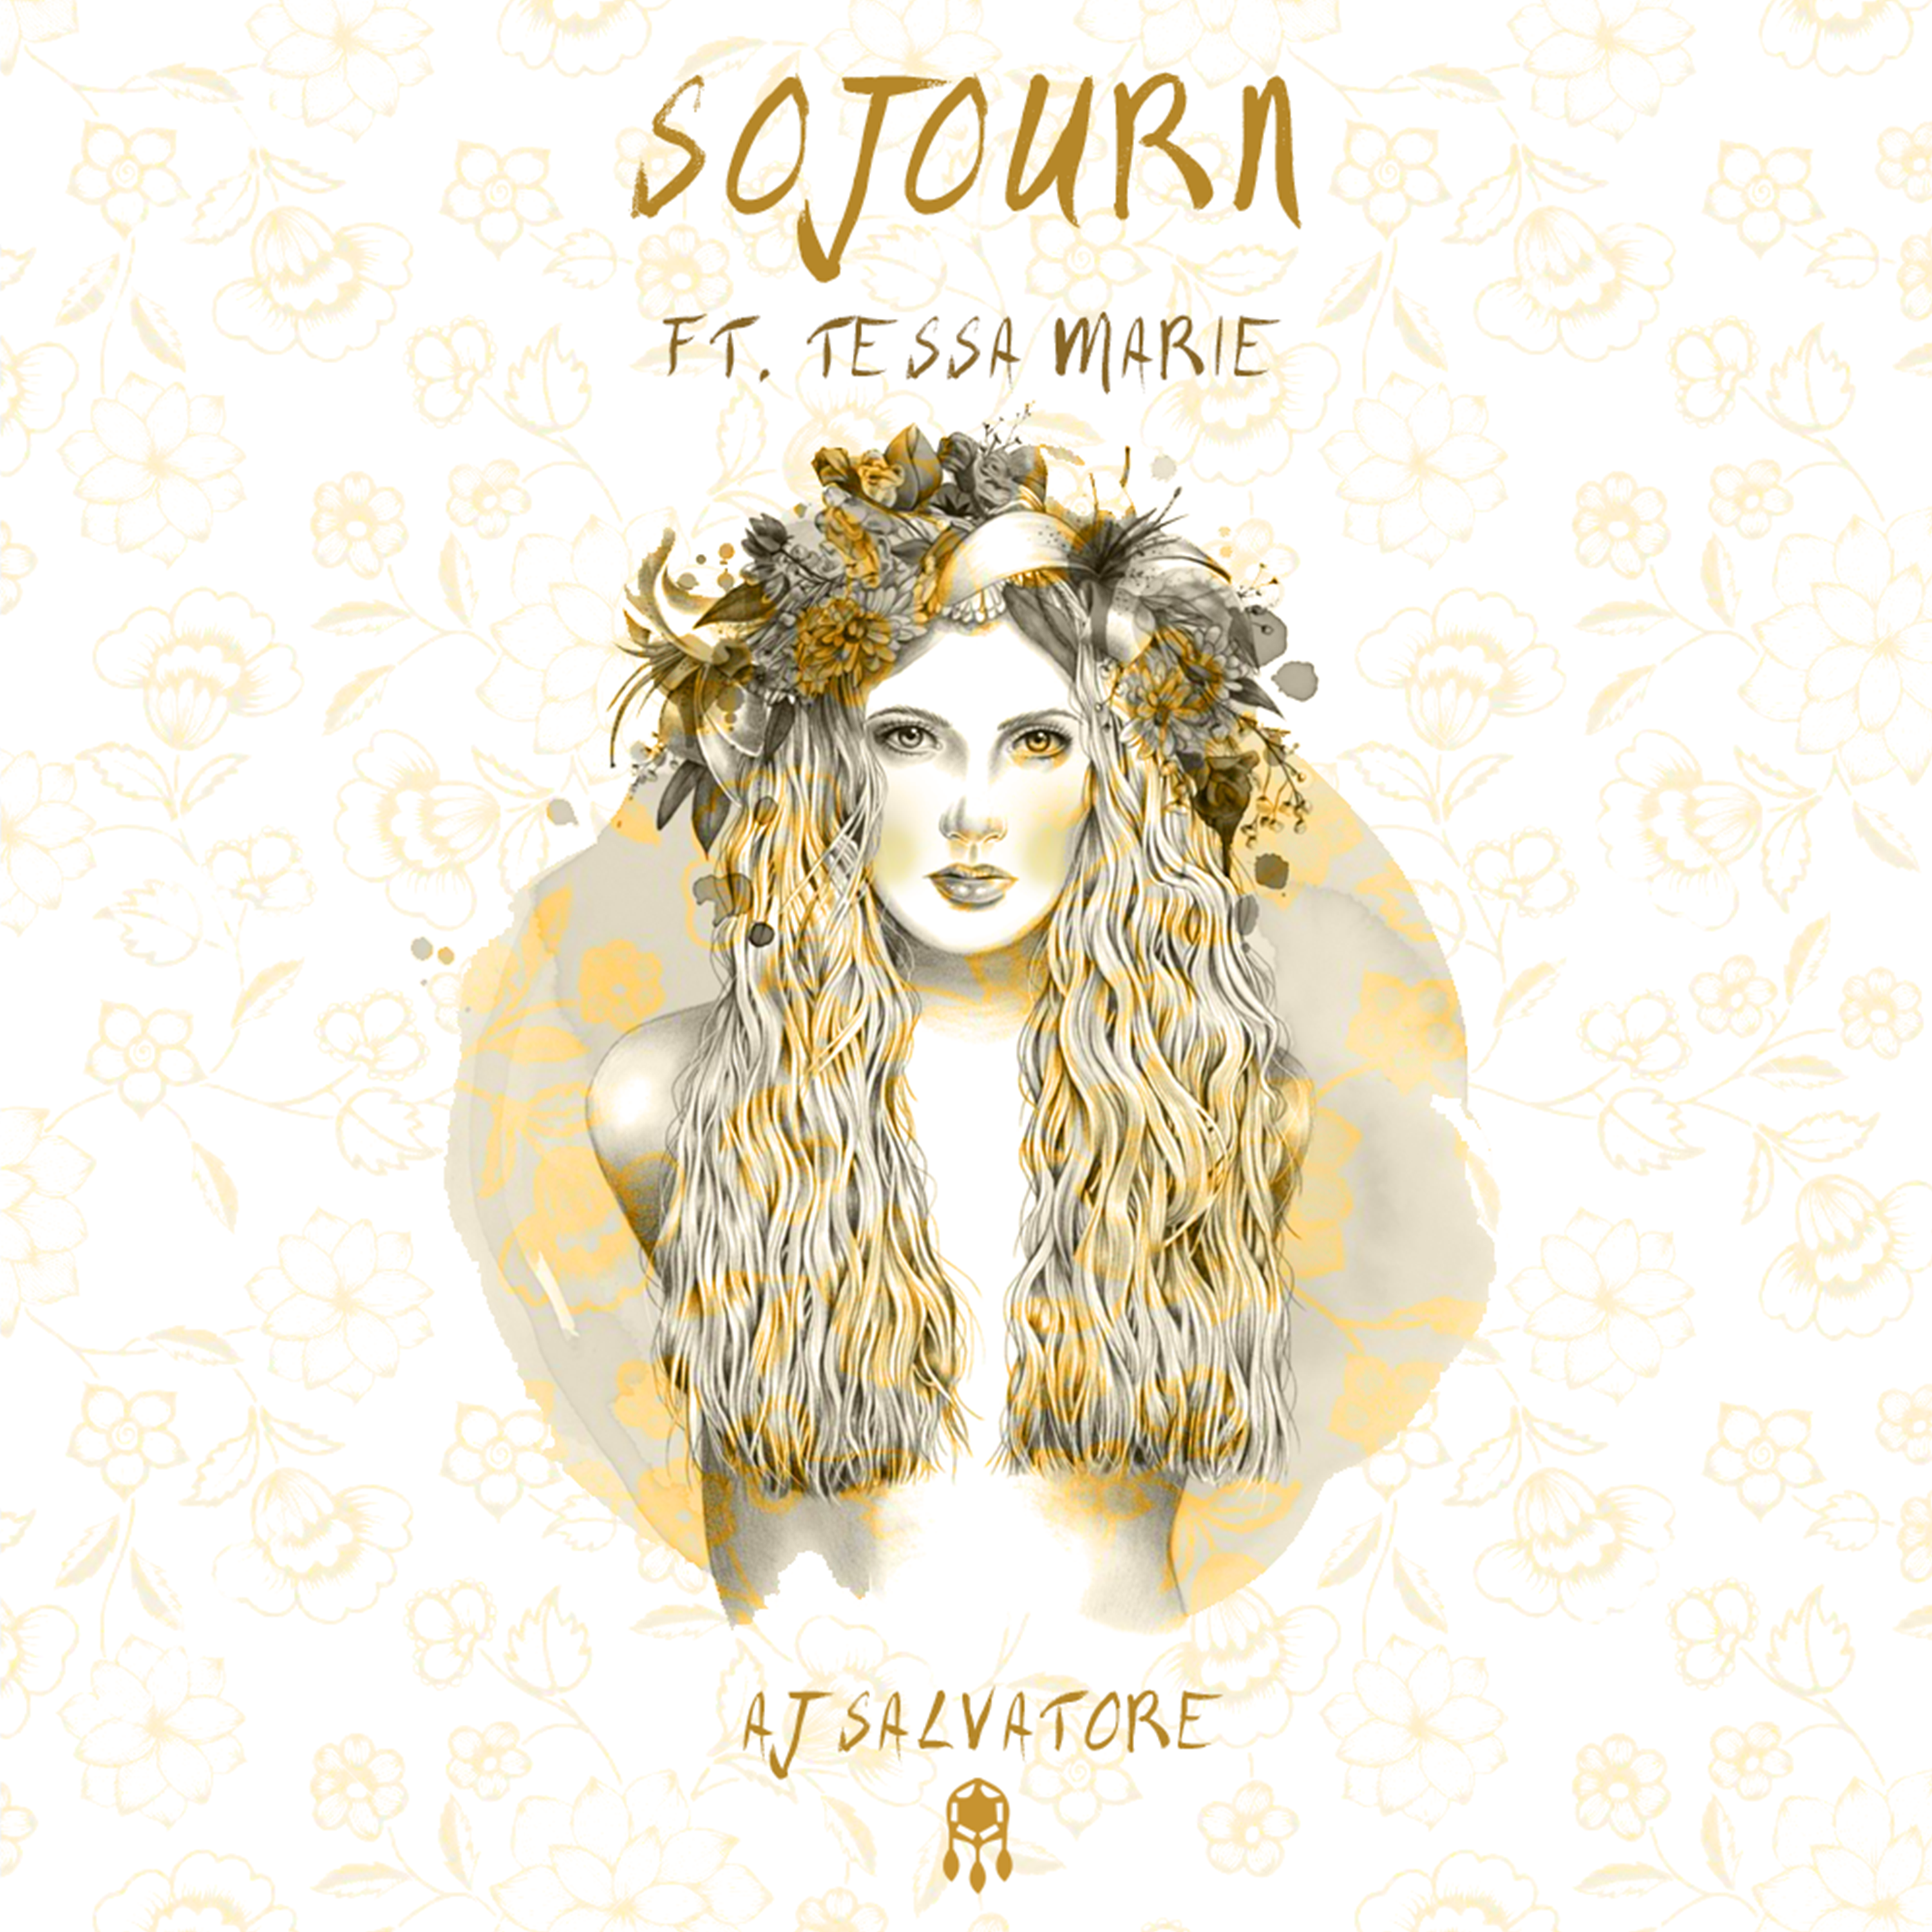 Sojourn by R.A. Salvatore